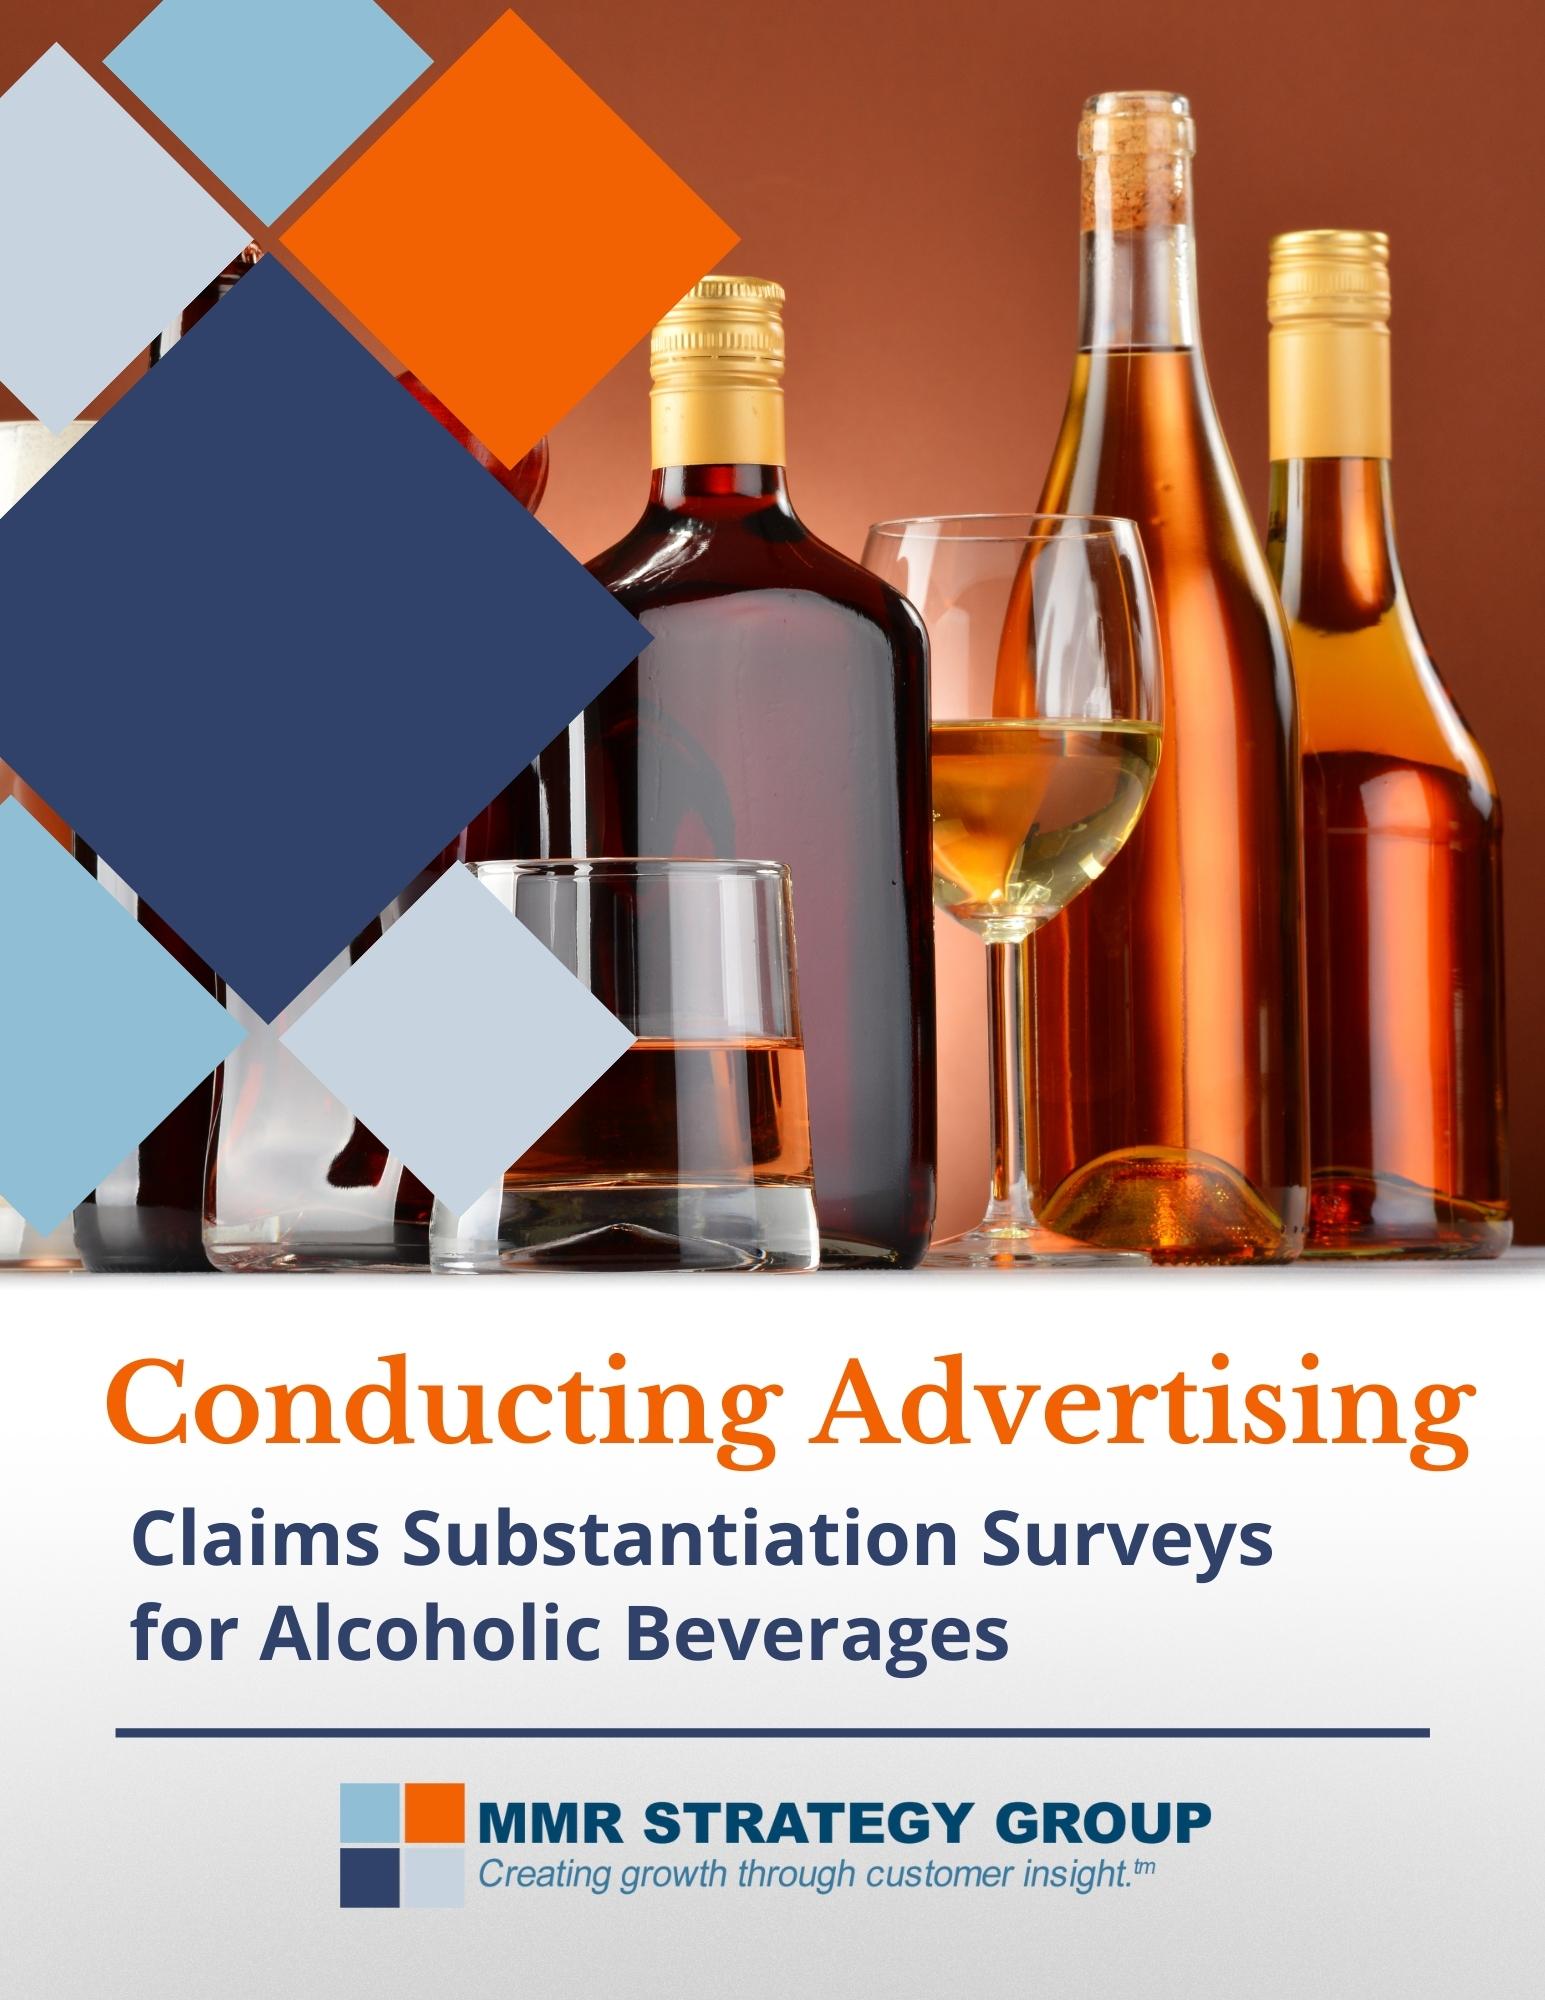 Conducting Advertising Claims Substantiation Surveys for Alcoholic Beverages